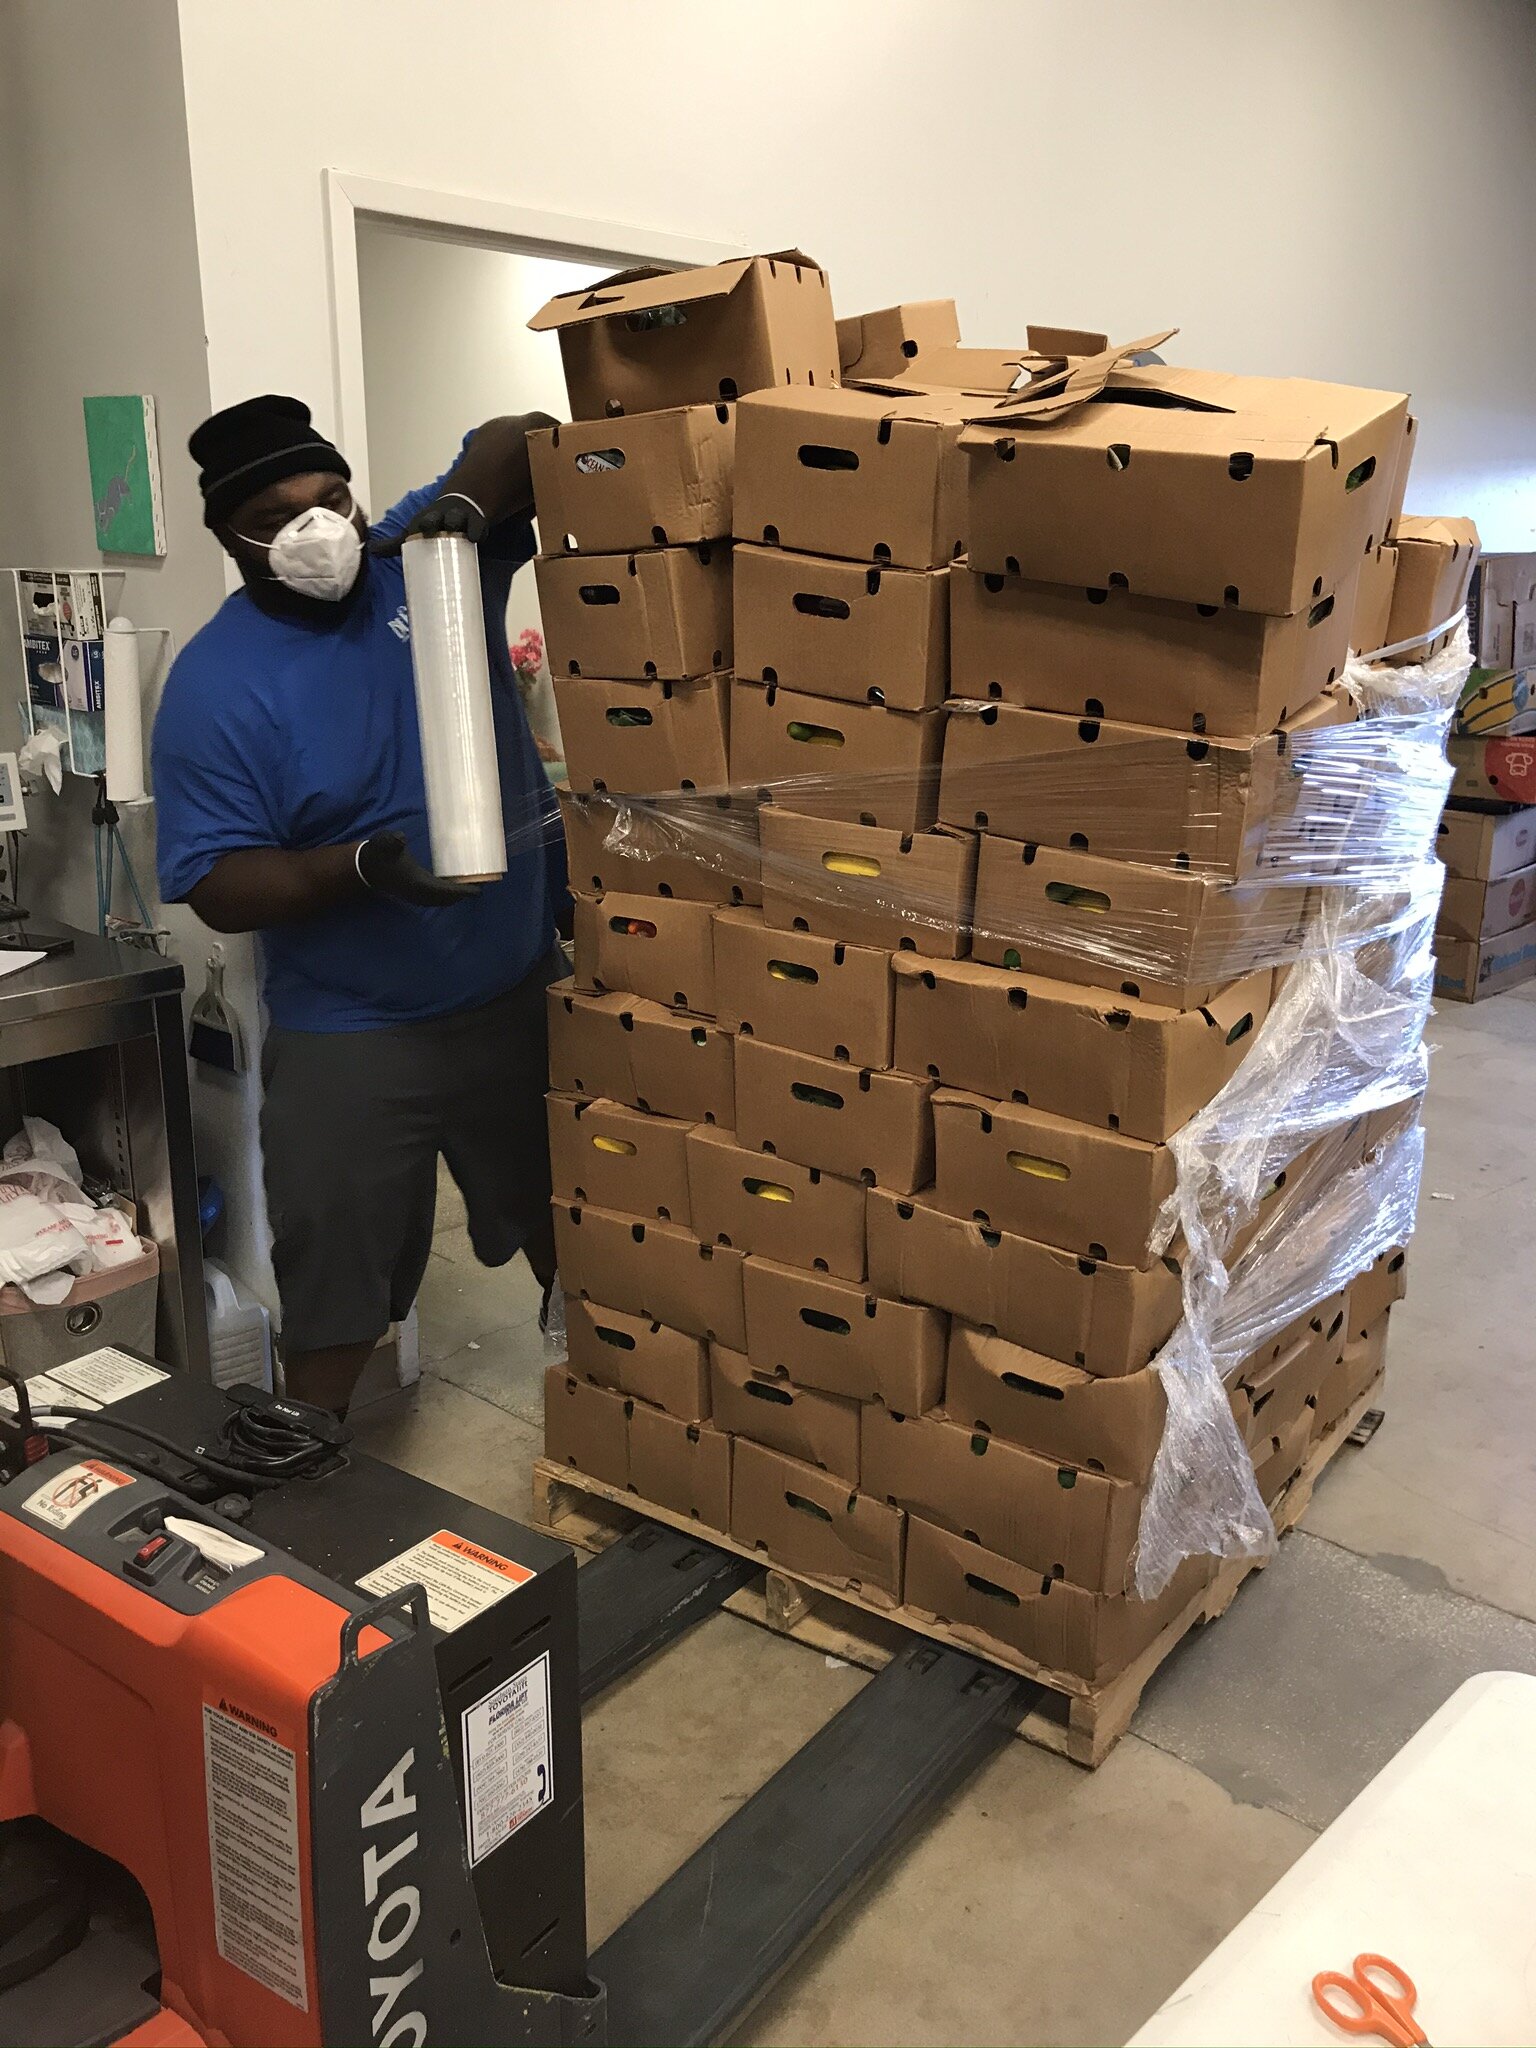 BEAM employee, Zee, stacks and wraps a large pallet of pre-packaged fresh produce, which will be distributed to partner agencies who serve high-risk seniors at the beaches.